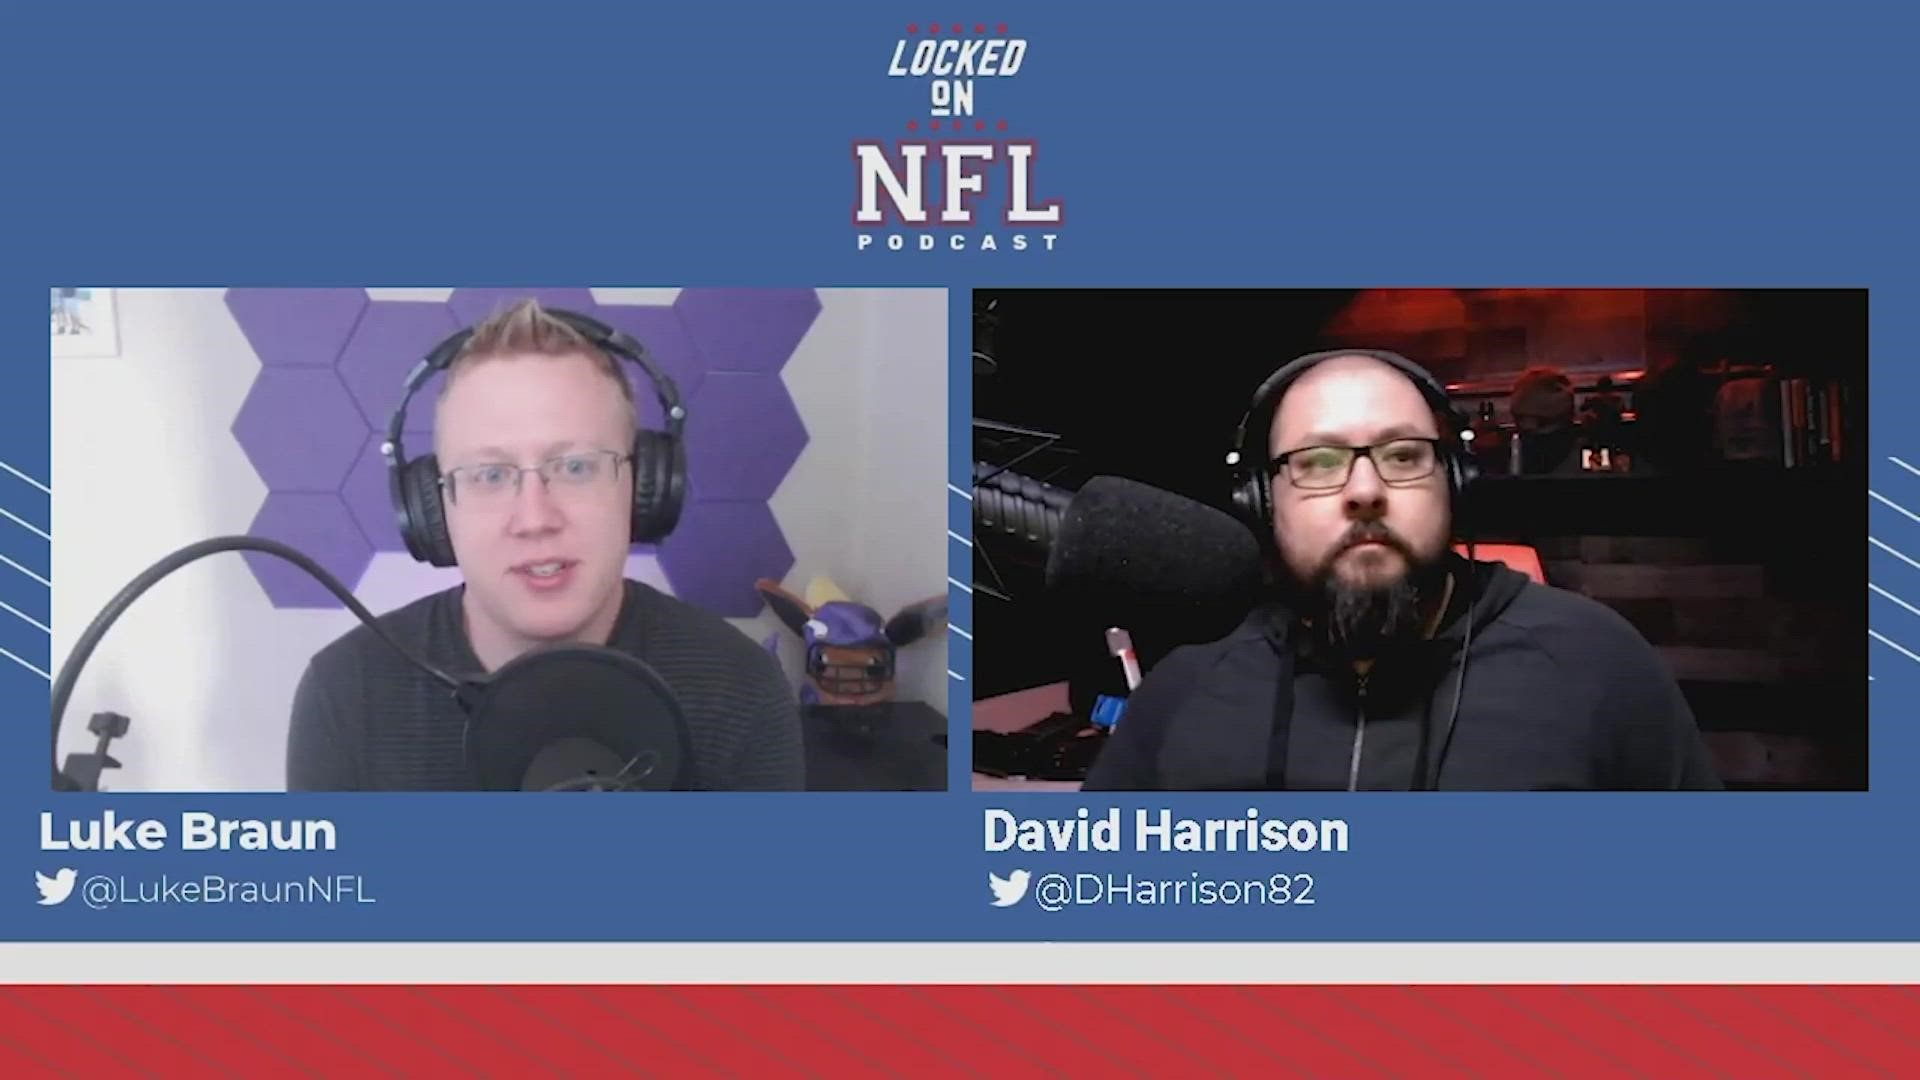 Hosts David Harrison and Luke Braun analyze rumors that Tom Brady was planning to try to make a move to the Miami Dolphins this offseason.